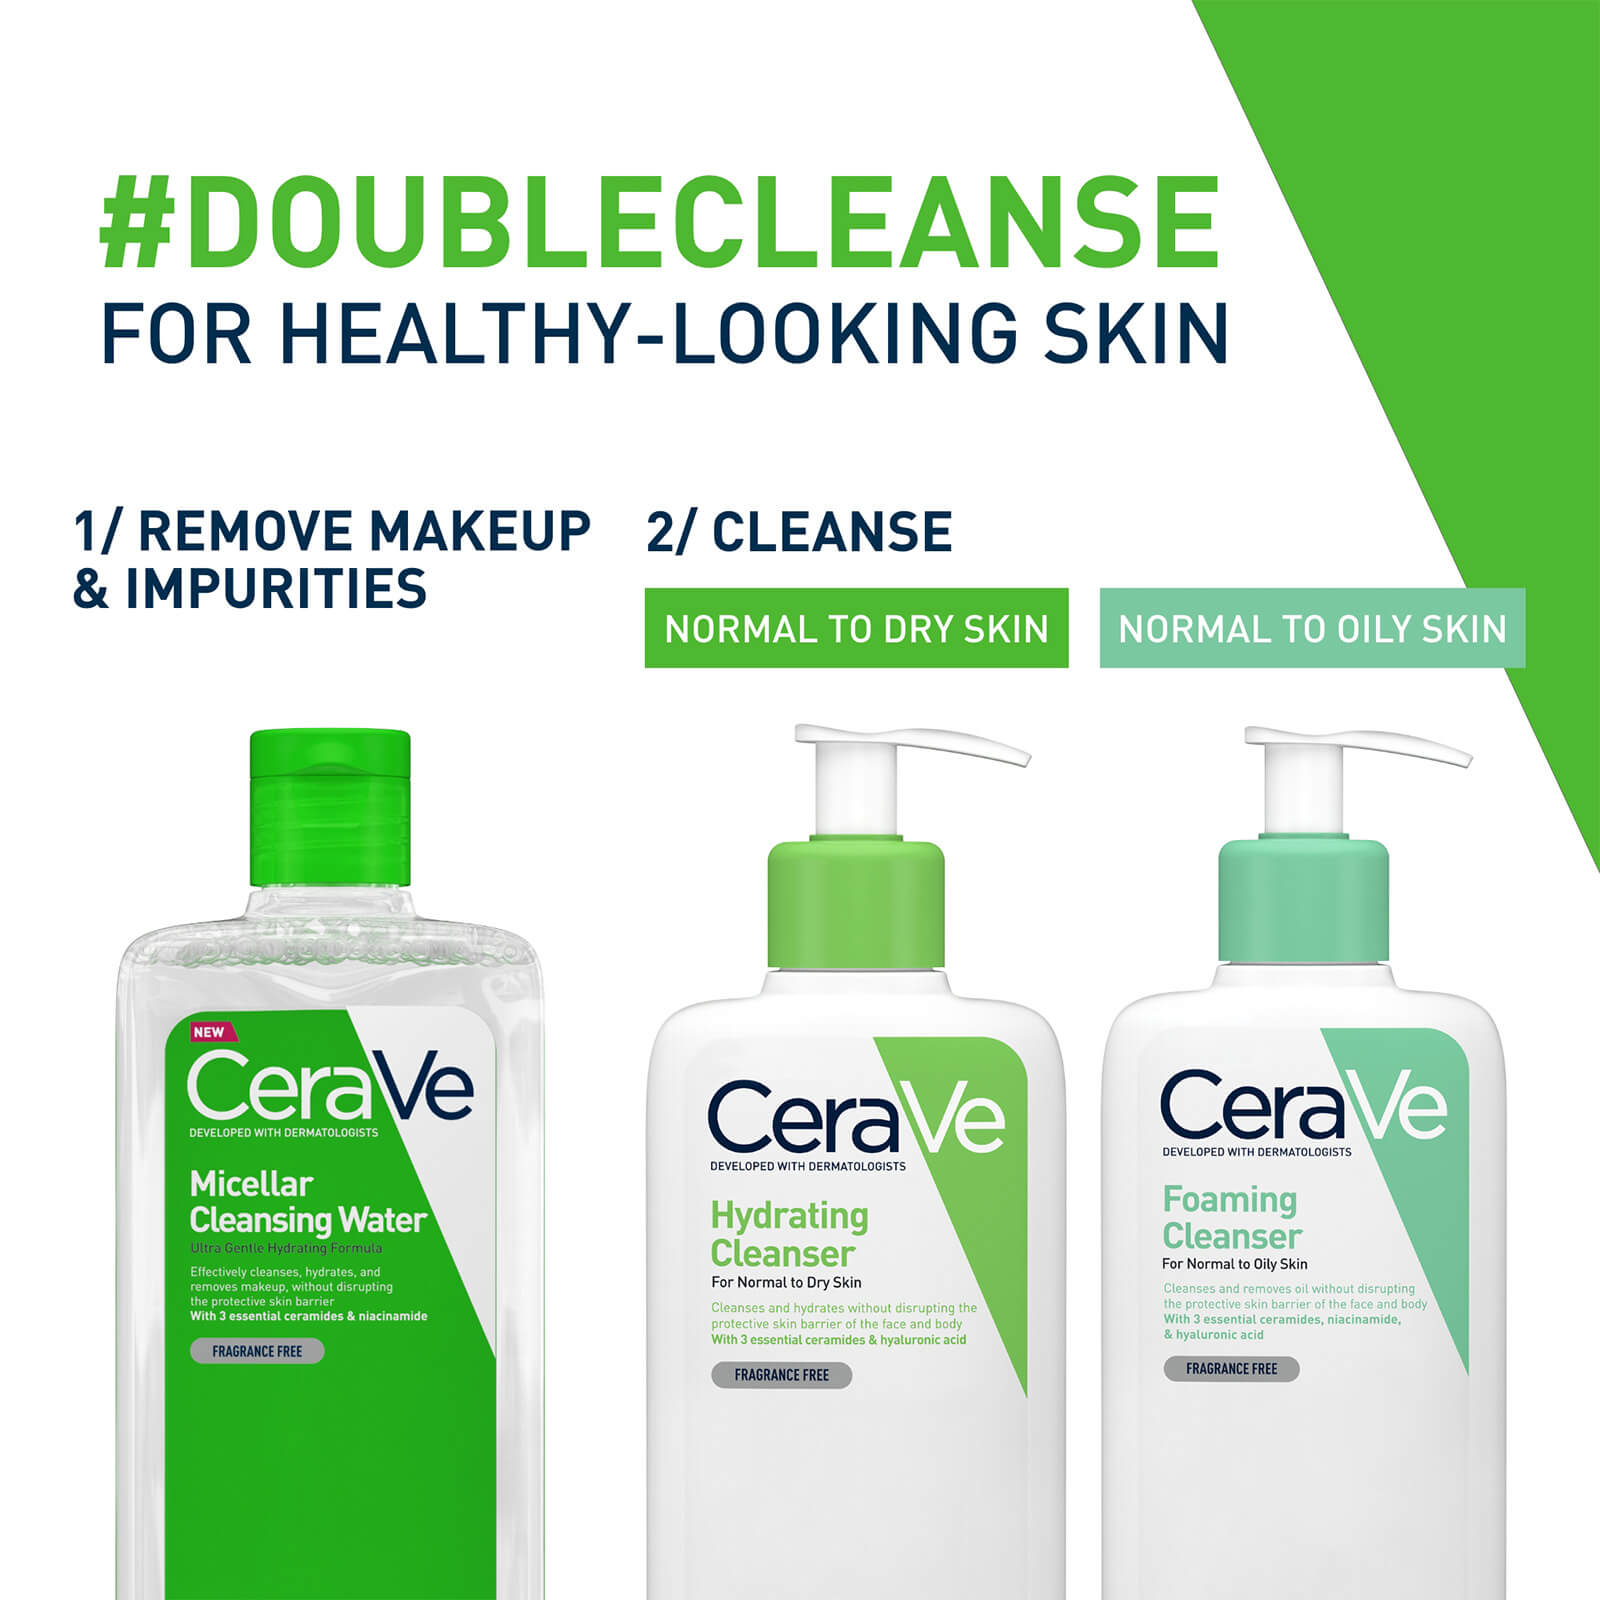 doublecleanse, for healthy looking skin, remove makeup and impurities, cleanse, normal to dry skin